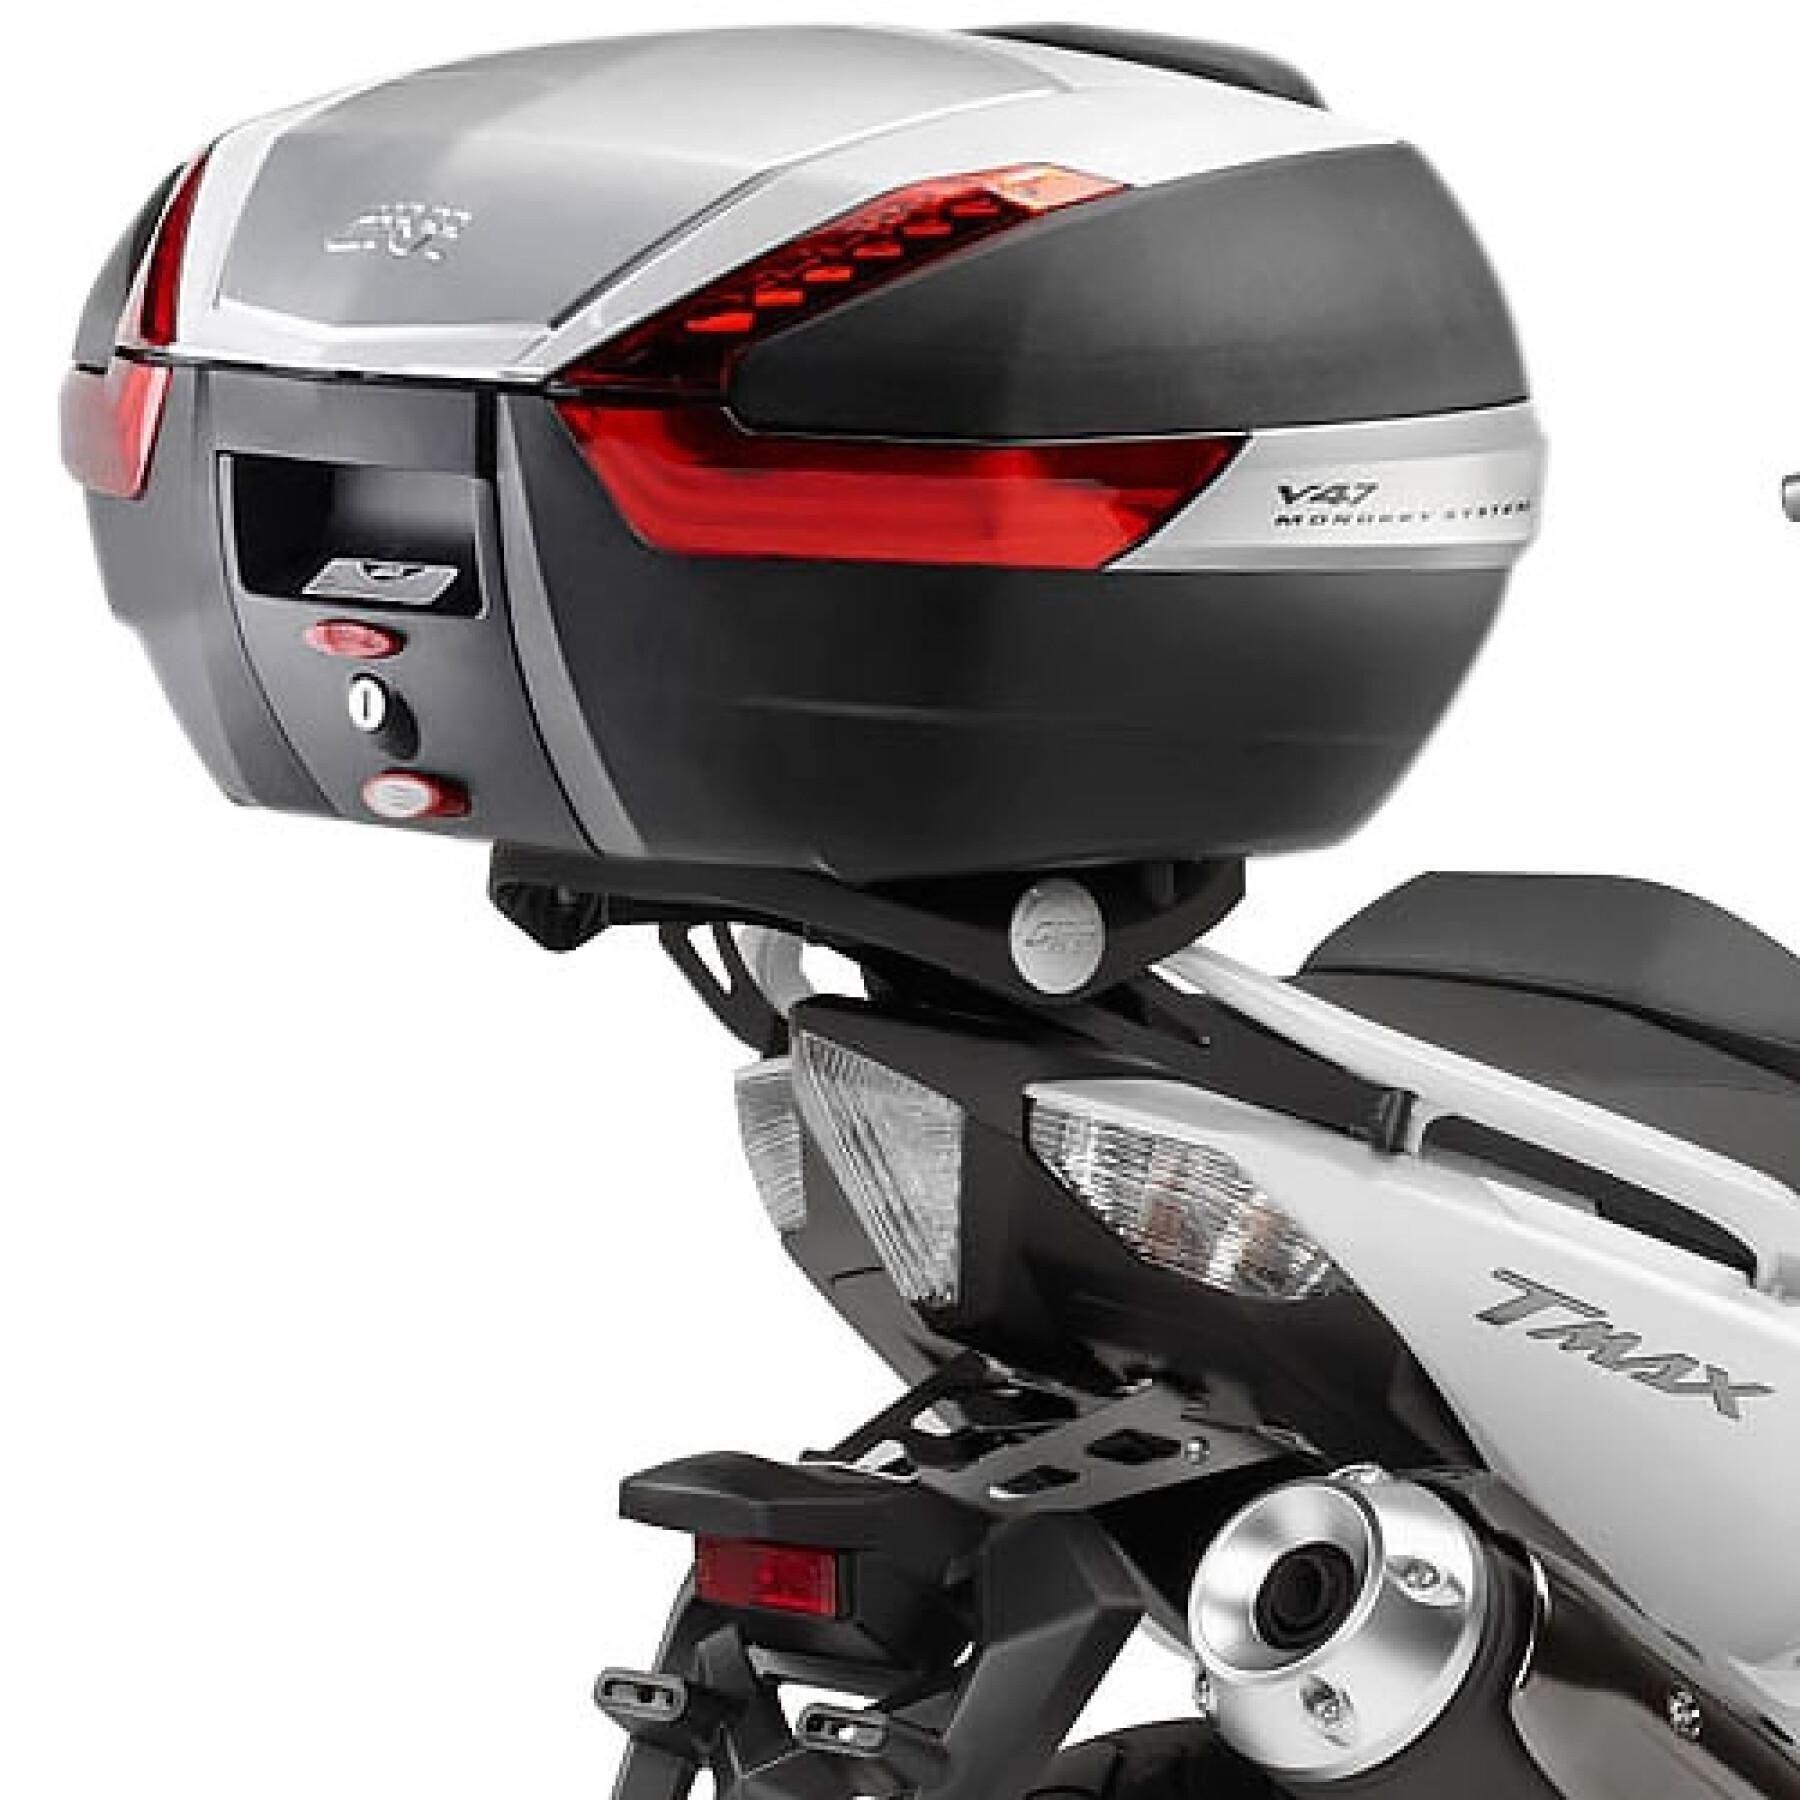 Support top case scooter Givi Monokey Yamaha T-Max 500 (08 à 11)